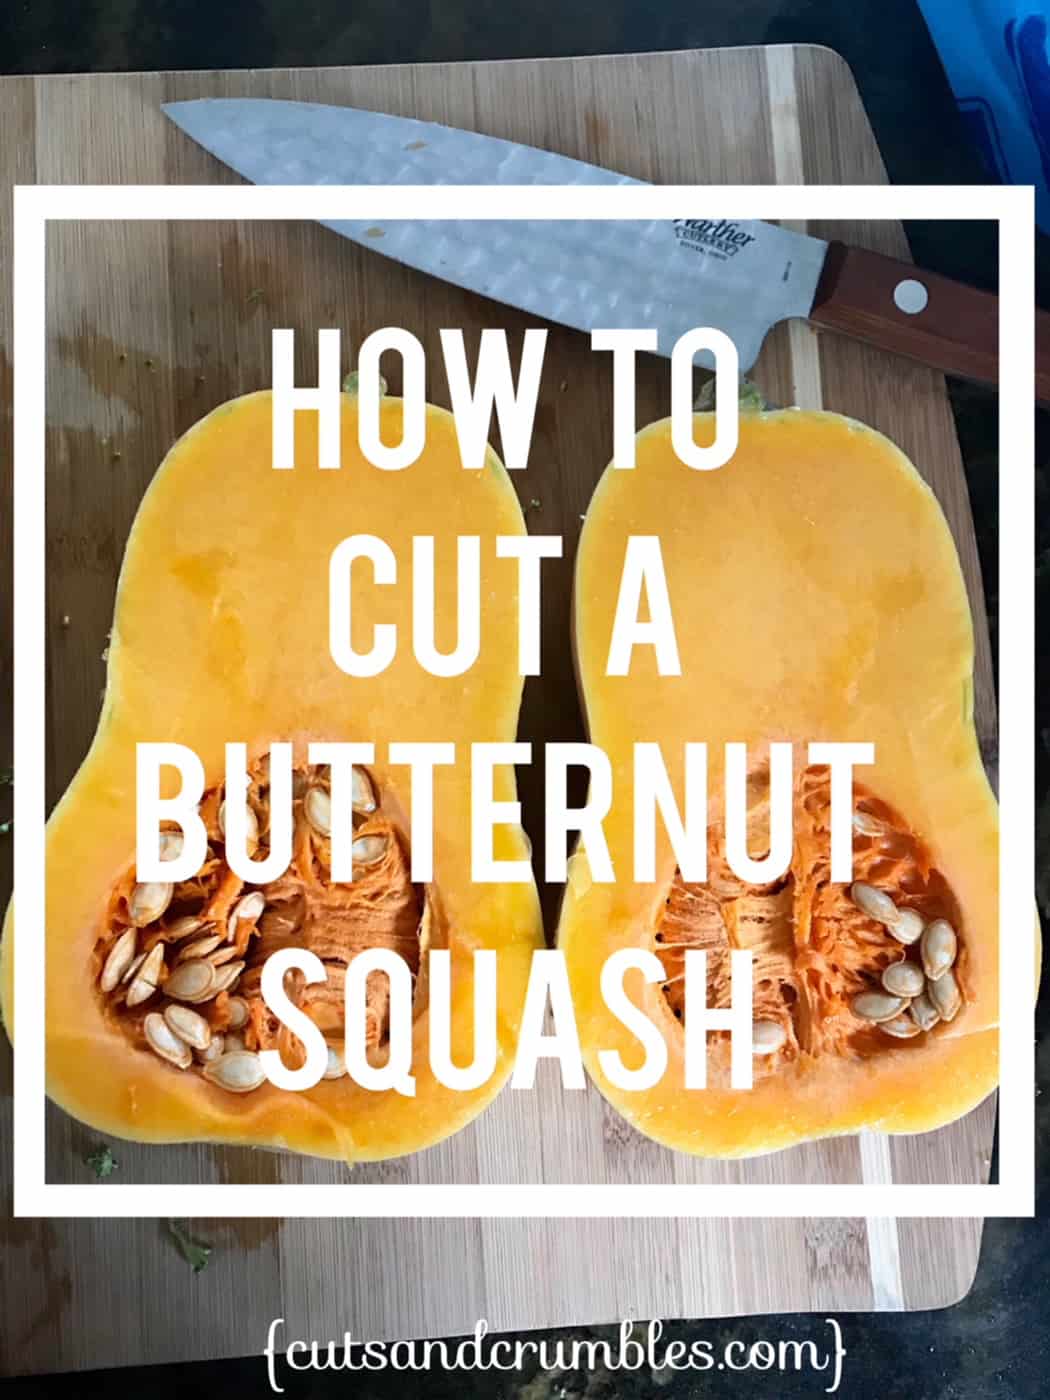 How to Cut a Butternut Squash title image